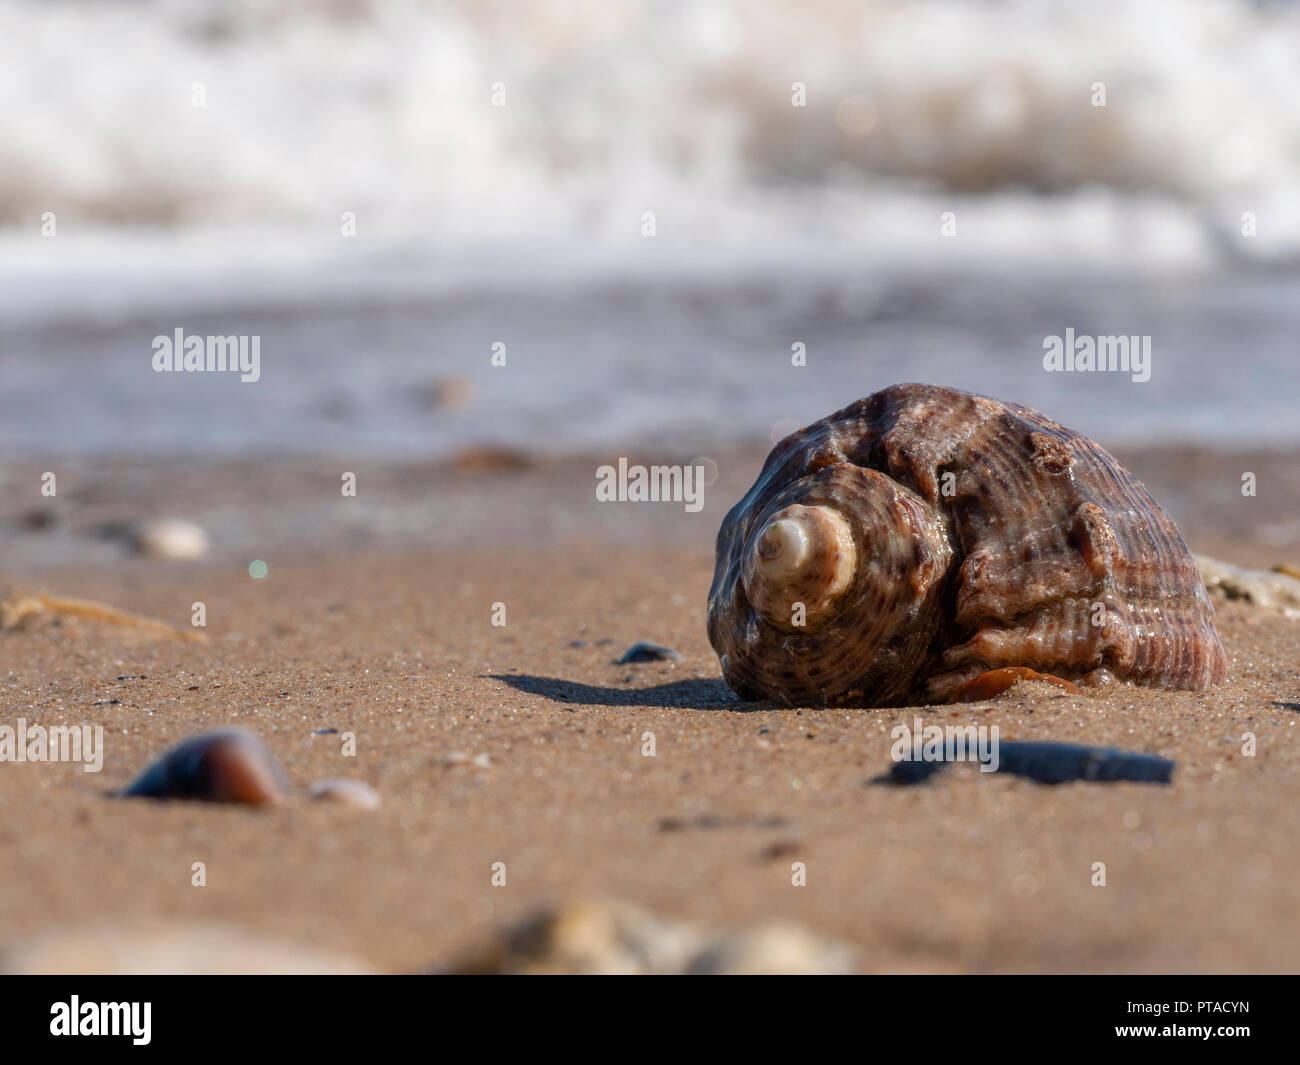 A closeup of an empty shell of rapana mollusk in the surf on a sandy beach Stock Photo